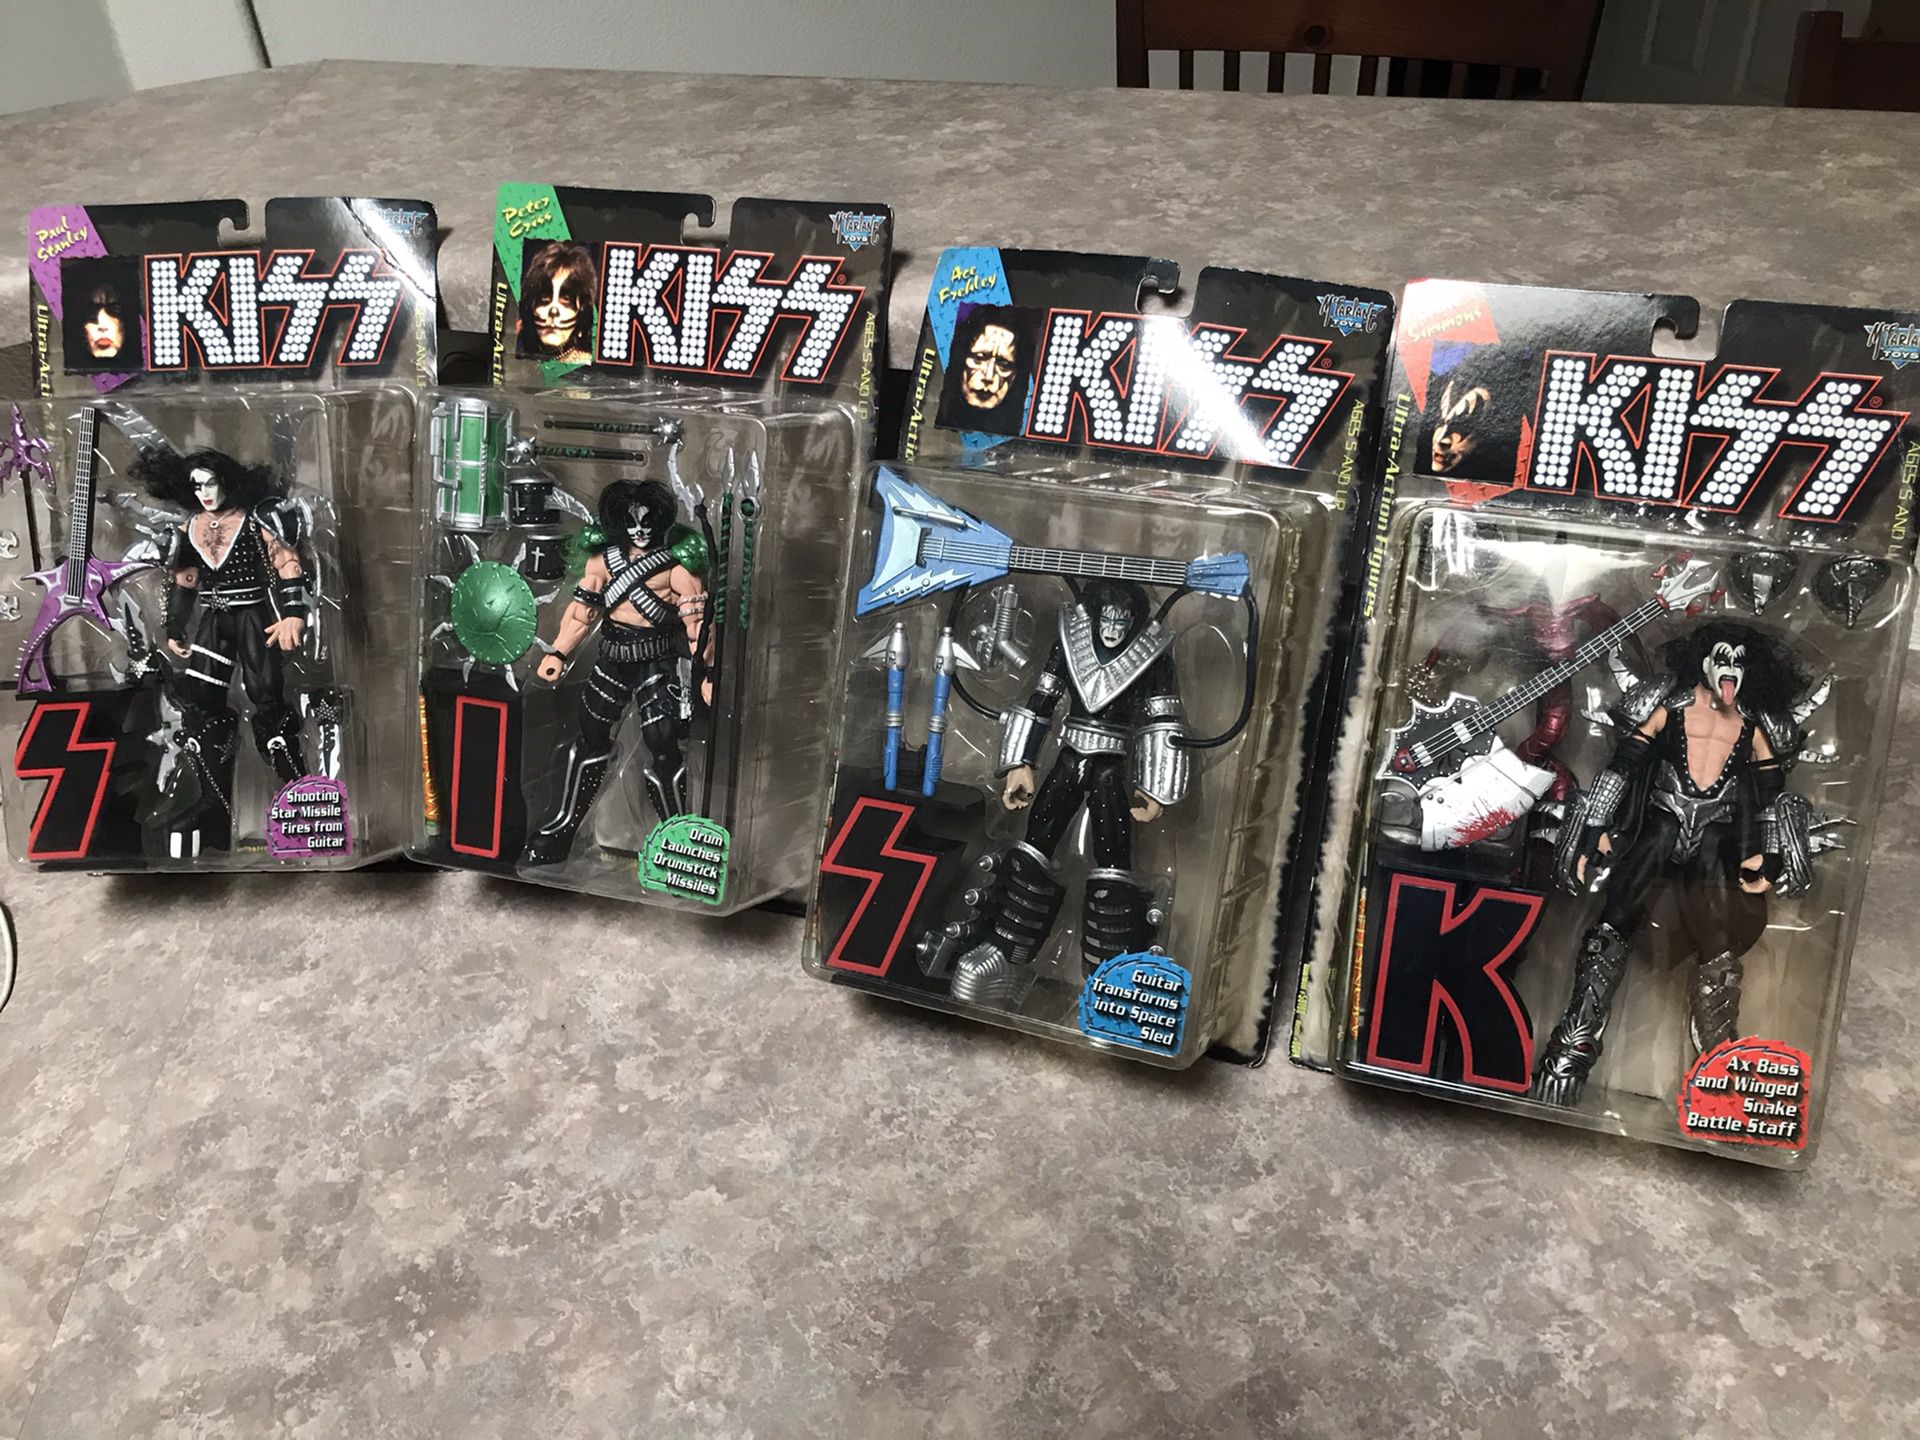 KISS action figures - collectors items. Boxes never opened!